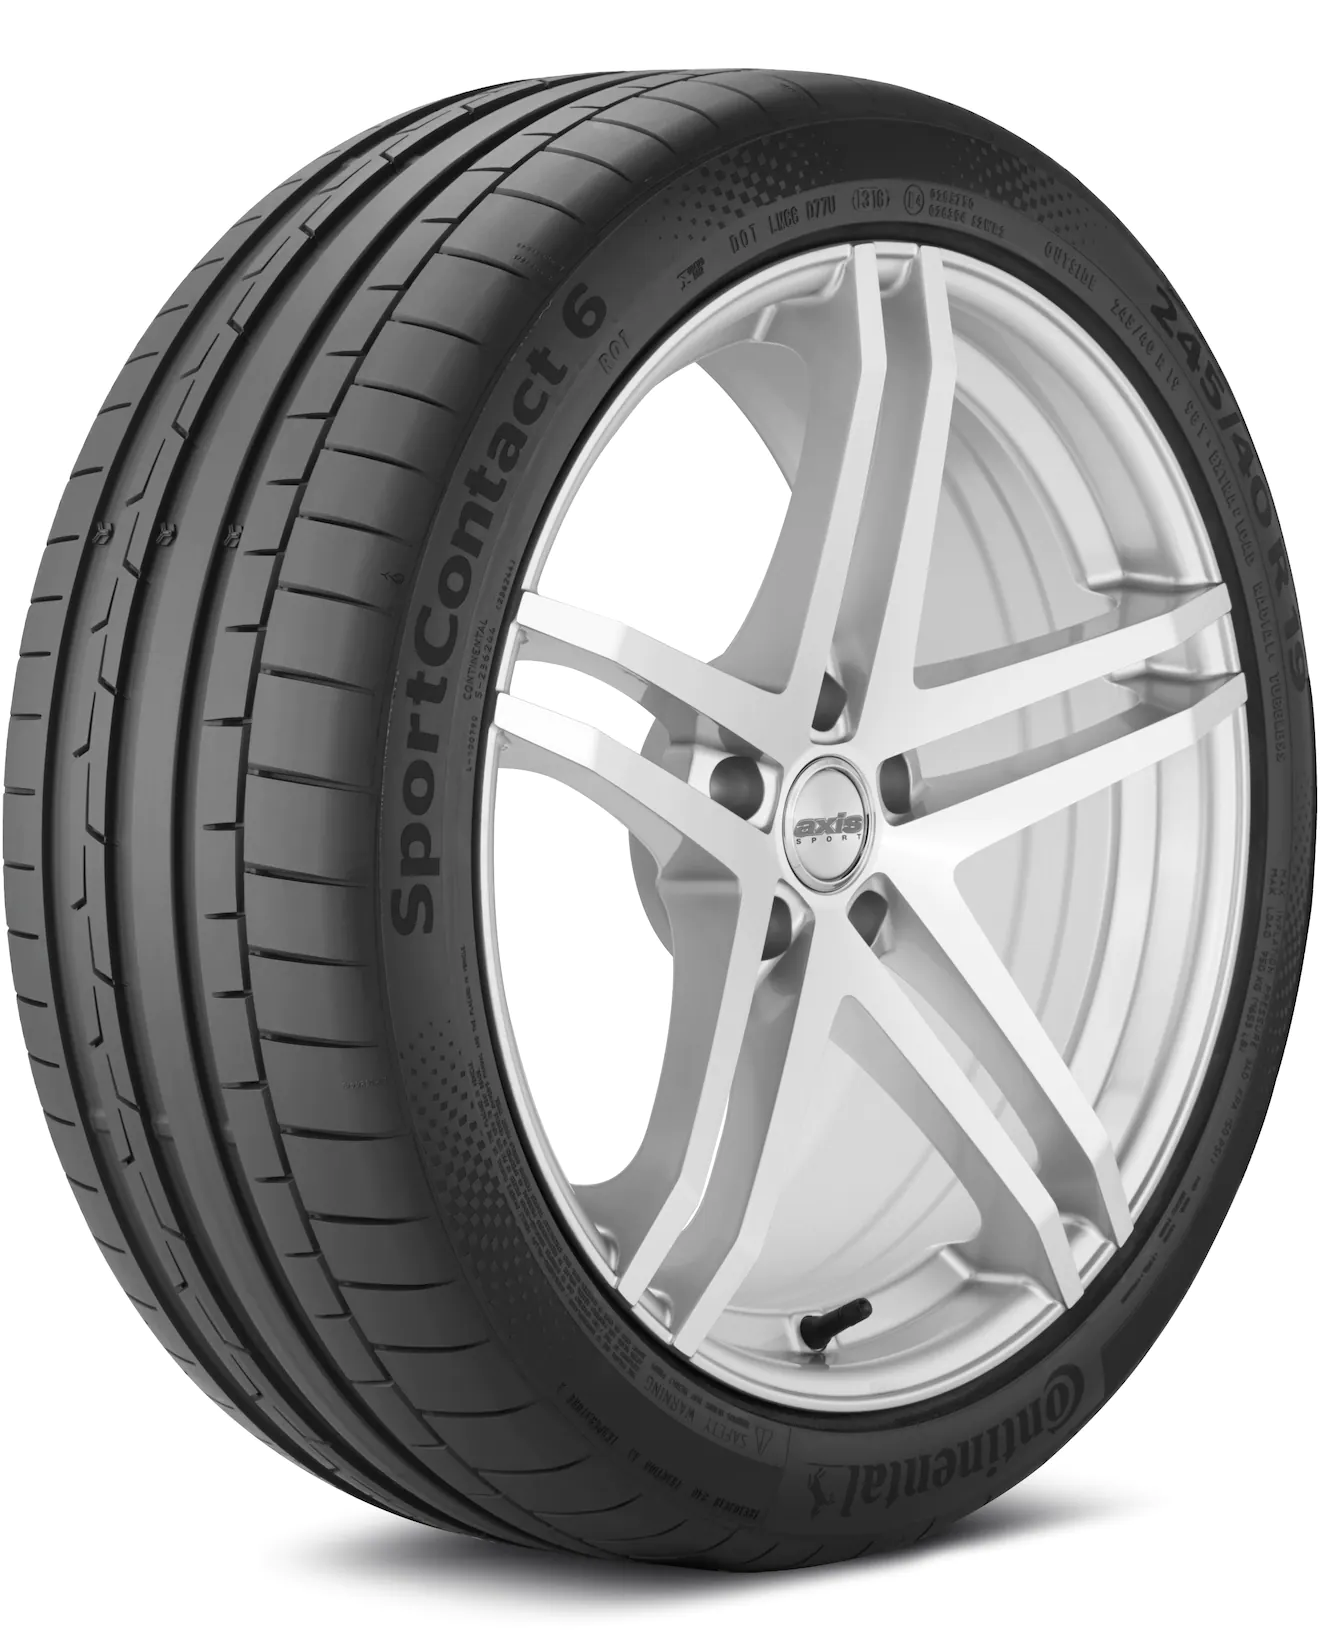 Continental SportContact 6 295/30 R20 101Y XL MO FP